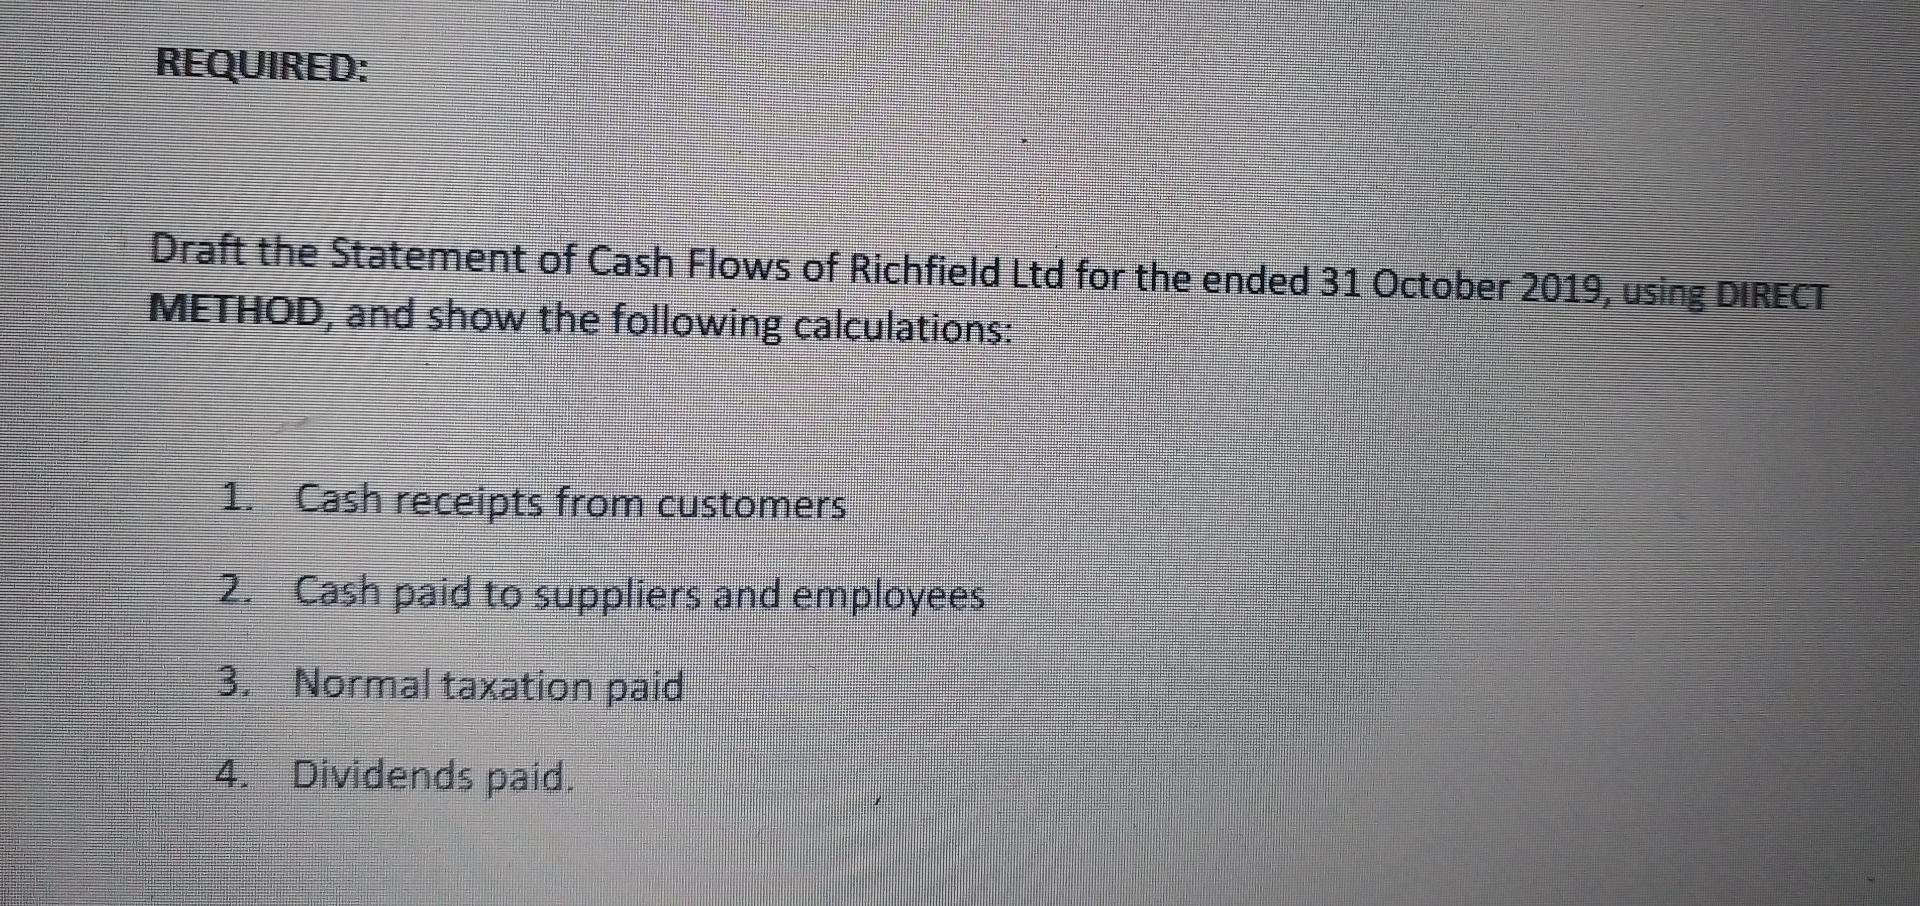 REQUIRED: Draft the Statement of Cash Flows of Richfield Ltd for the ended 31 October 2019, using DIRECT